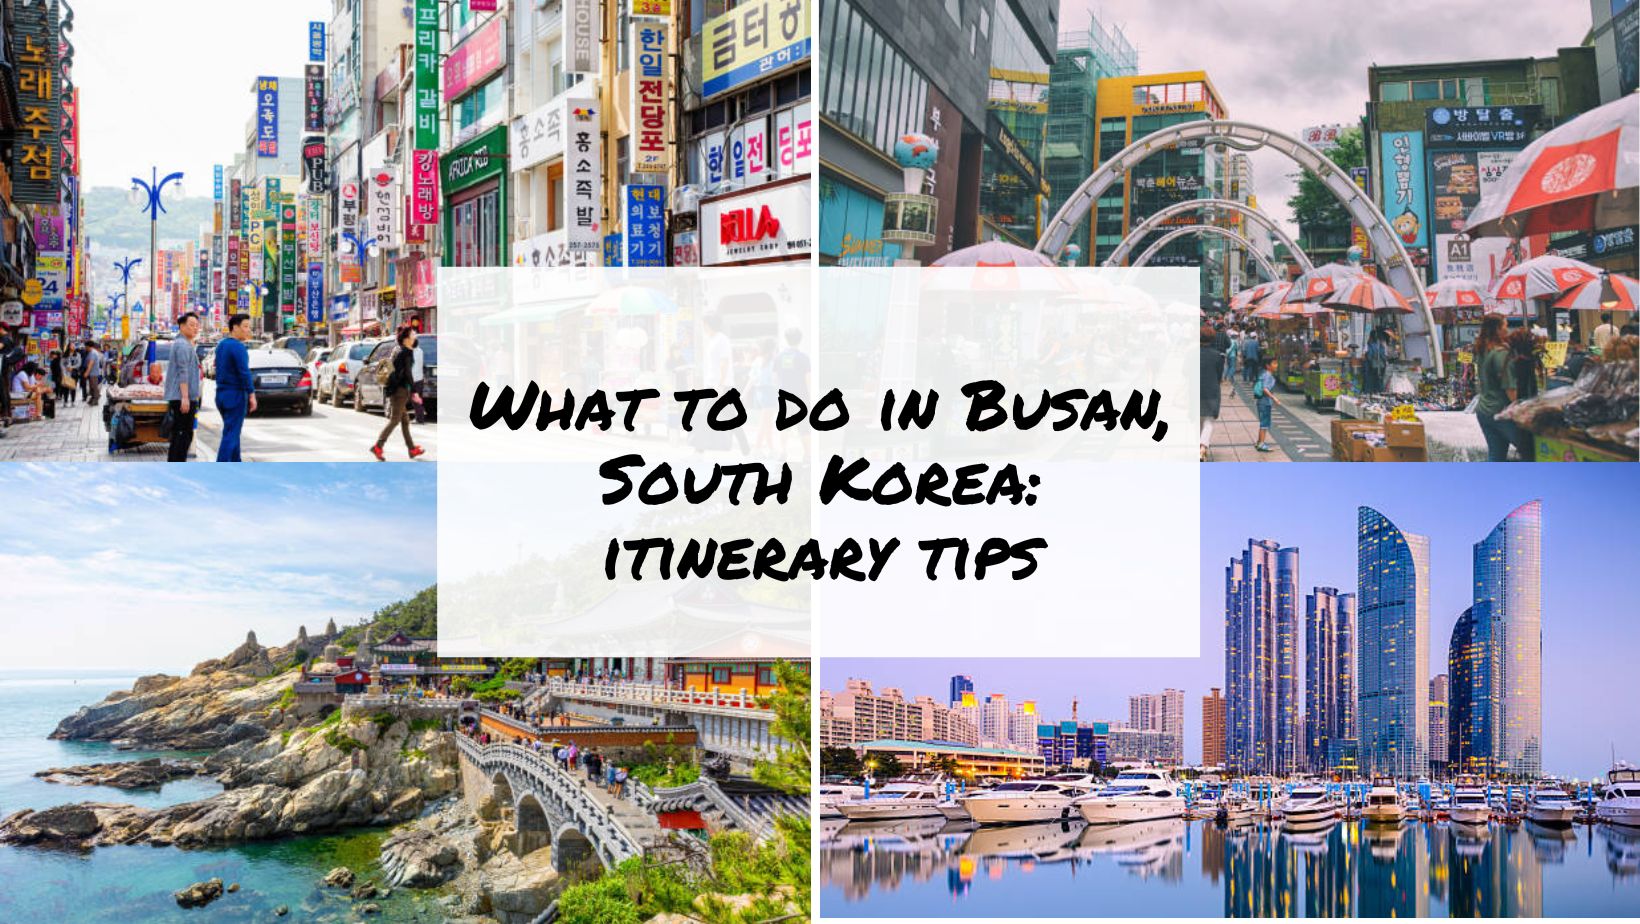 What to do in Busan, South Korea itinerary tips